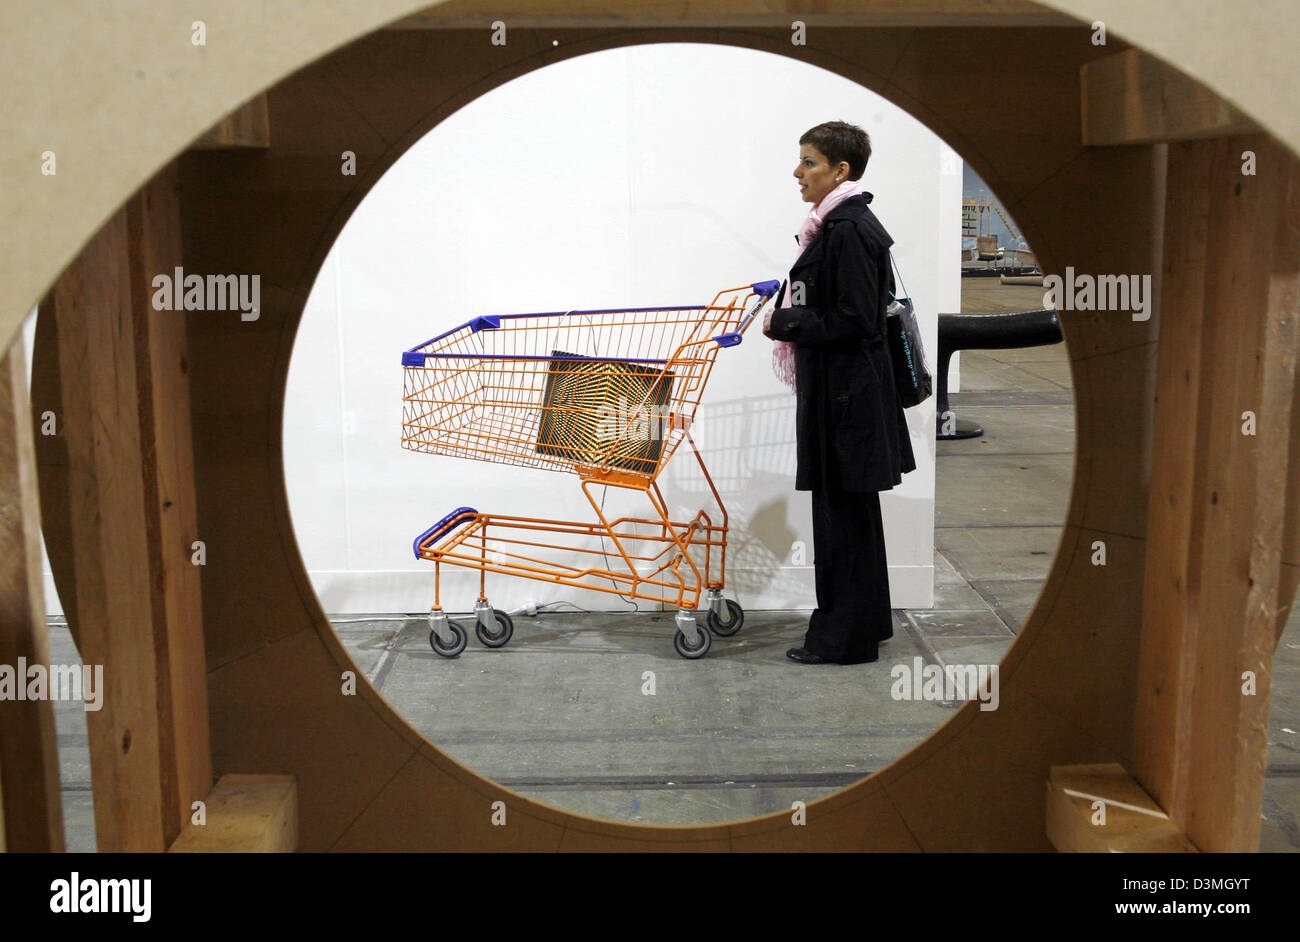 A visitor inspects the supermarket trolley of artist Philip Wiegard at the 'fine art fair frankfurt' in Frankfurt Main, Germany, Wednesday, 15 March 2006. Almost 50 galleries exhibit modern art from mainly young artists at the offspring fair of the former 'Art Frankfurt'. Photo: Frank Rumpenhorst Stock Photo